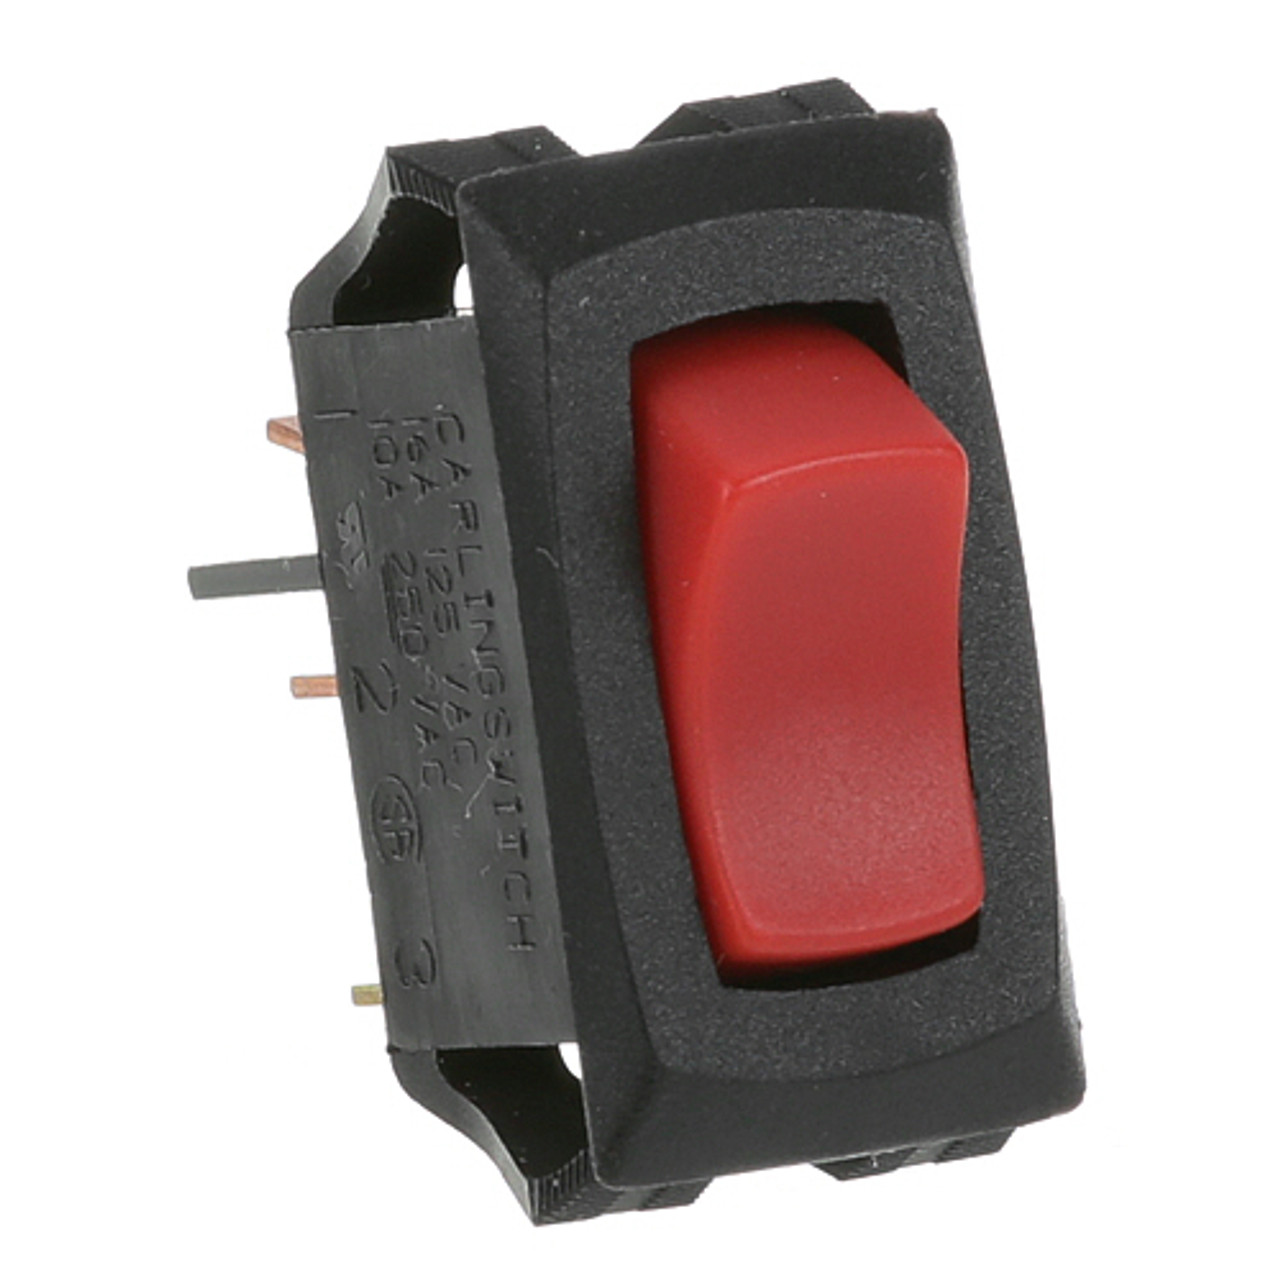 Rocker Switch 9/16 X 1-1/8 Spst - Replacement Part For Magikitch'N P5047142